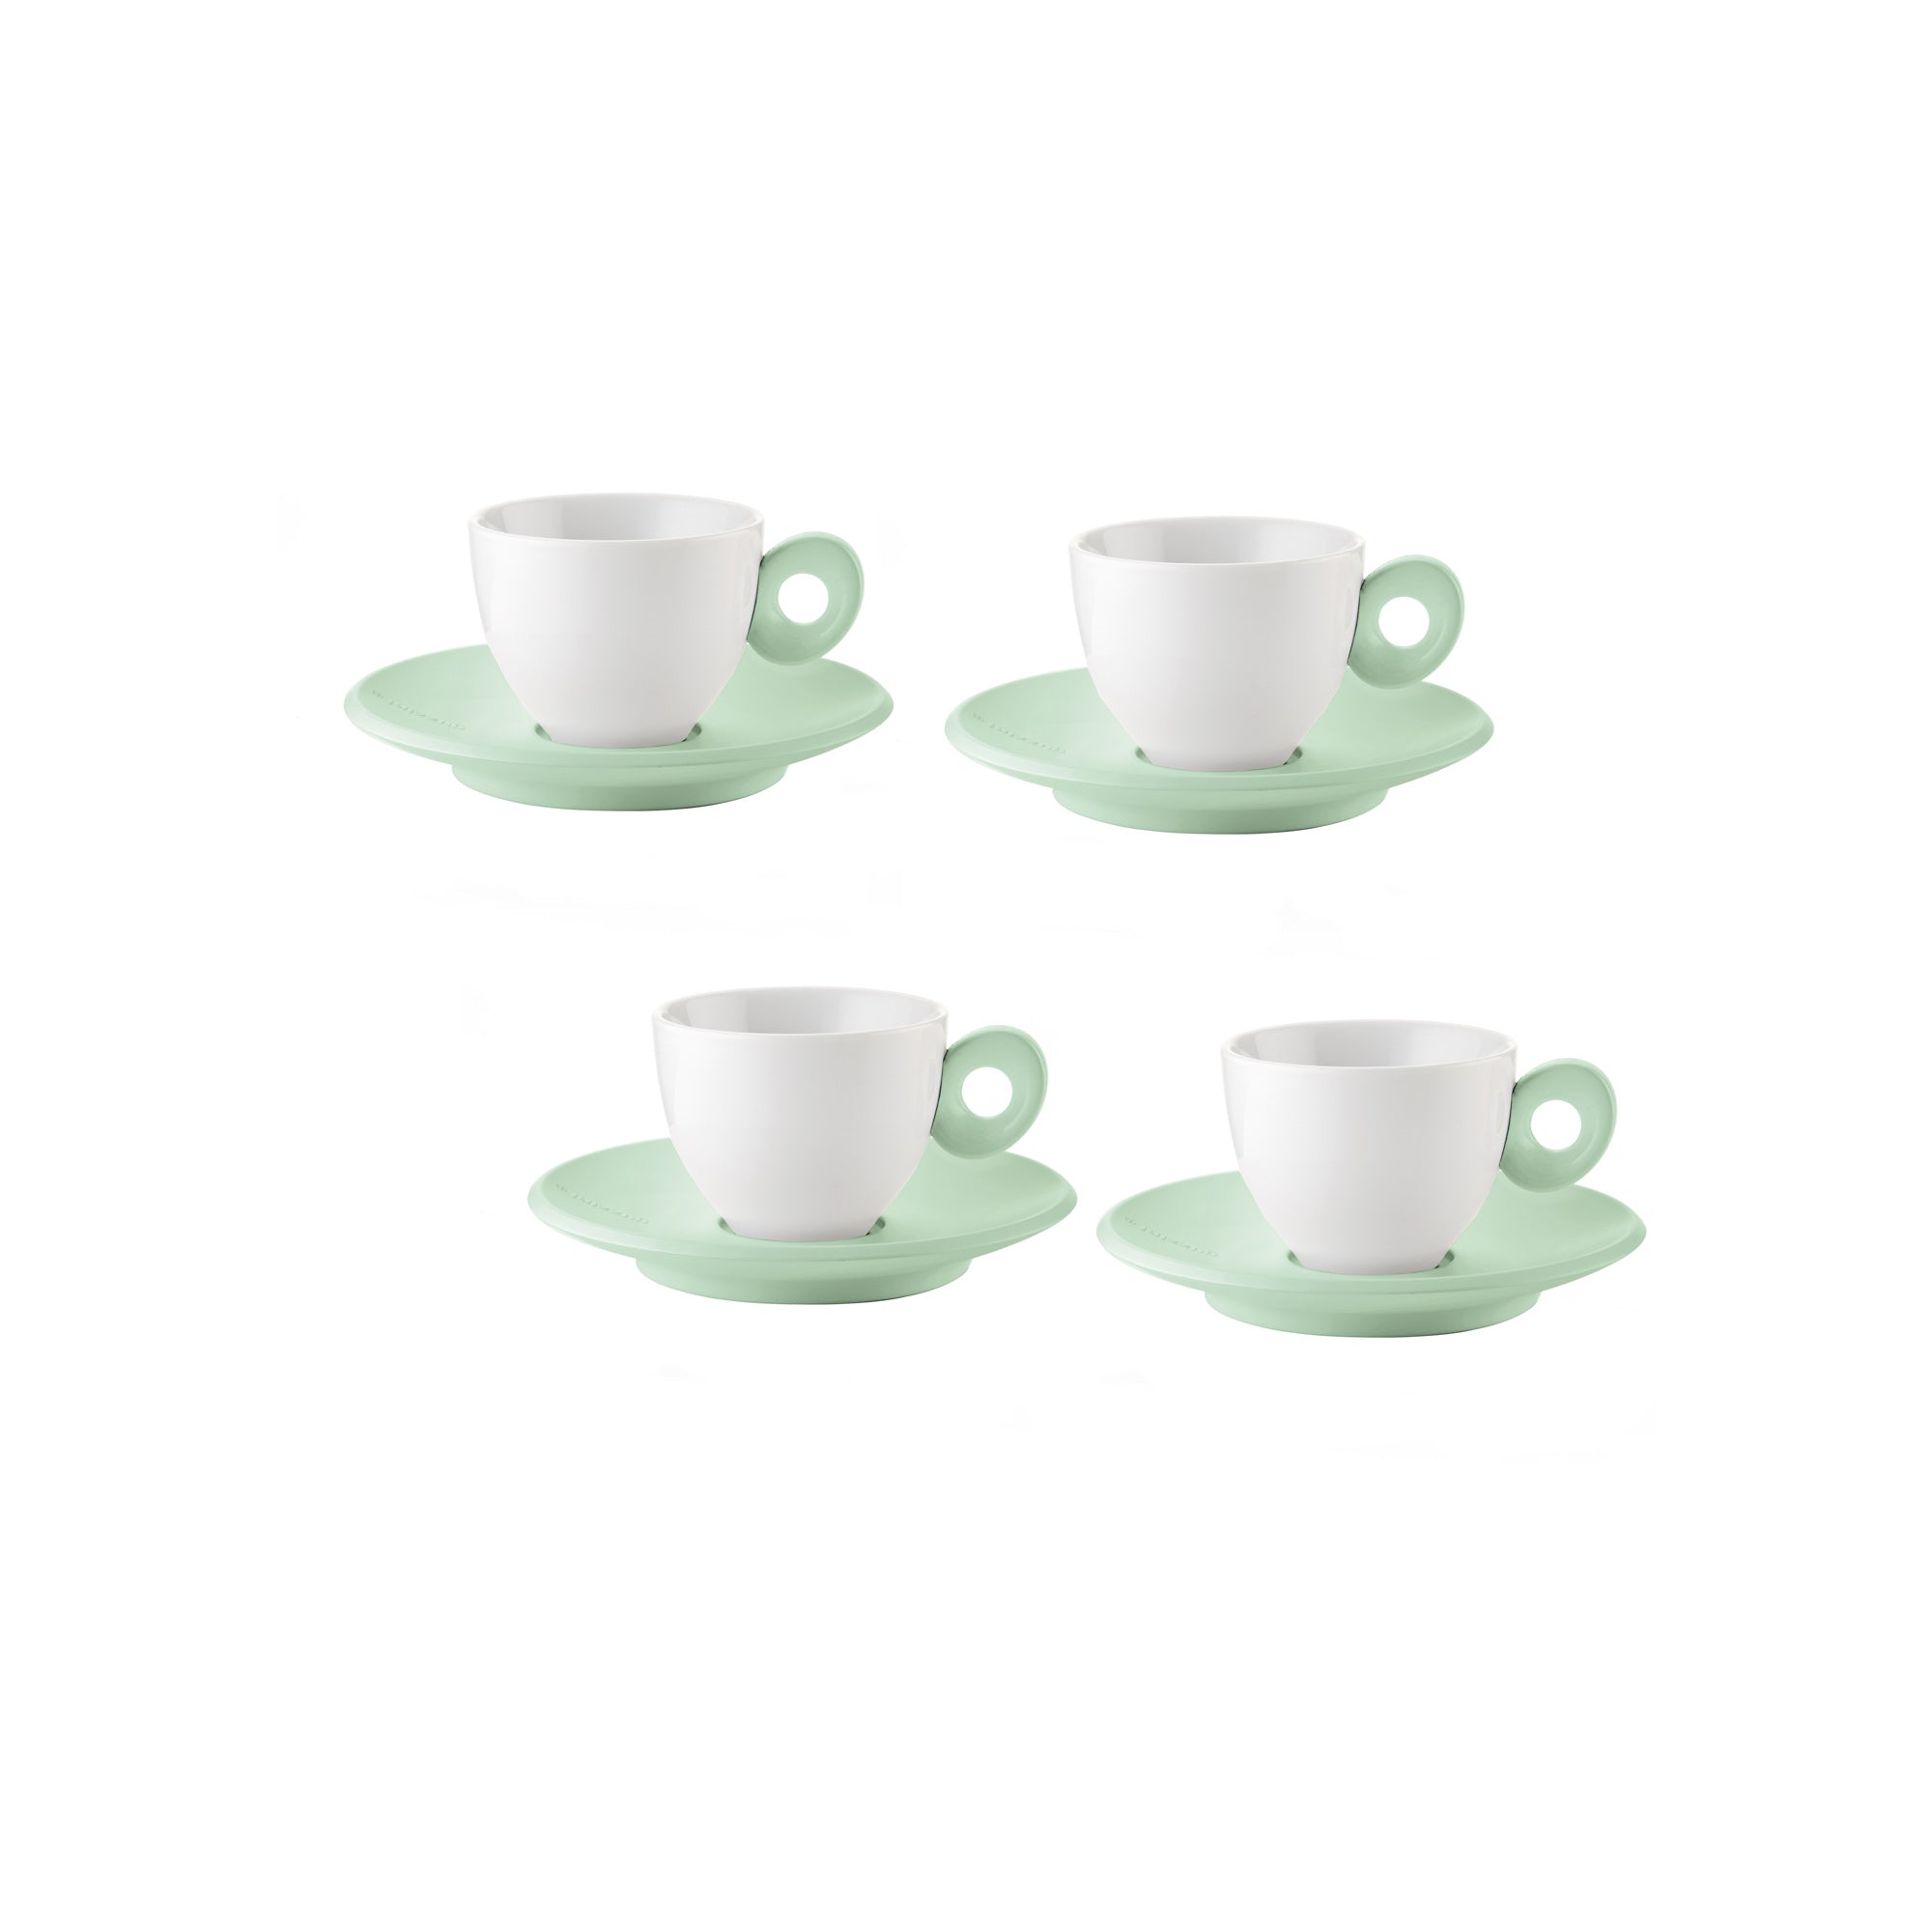 SET OF 4 ESPRESSO CUPS WITH SAUCERS "EVERYDAY"